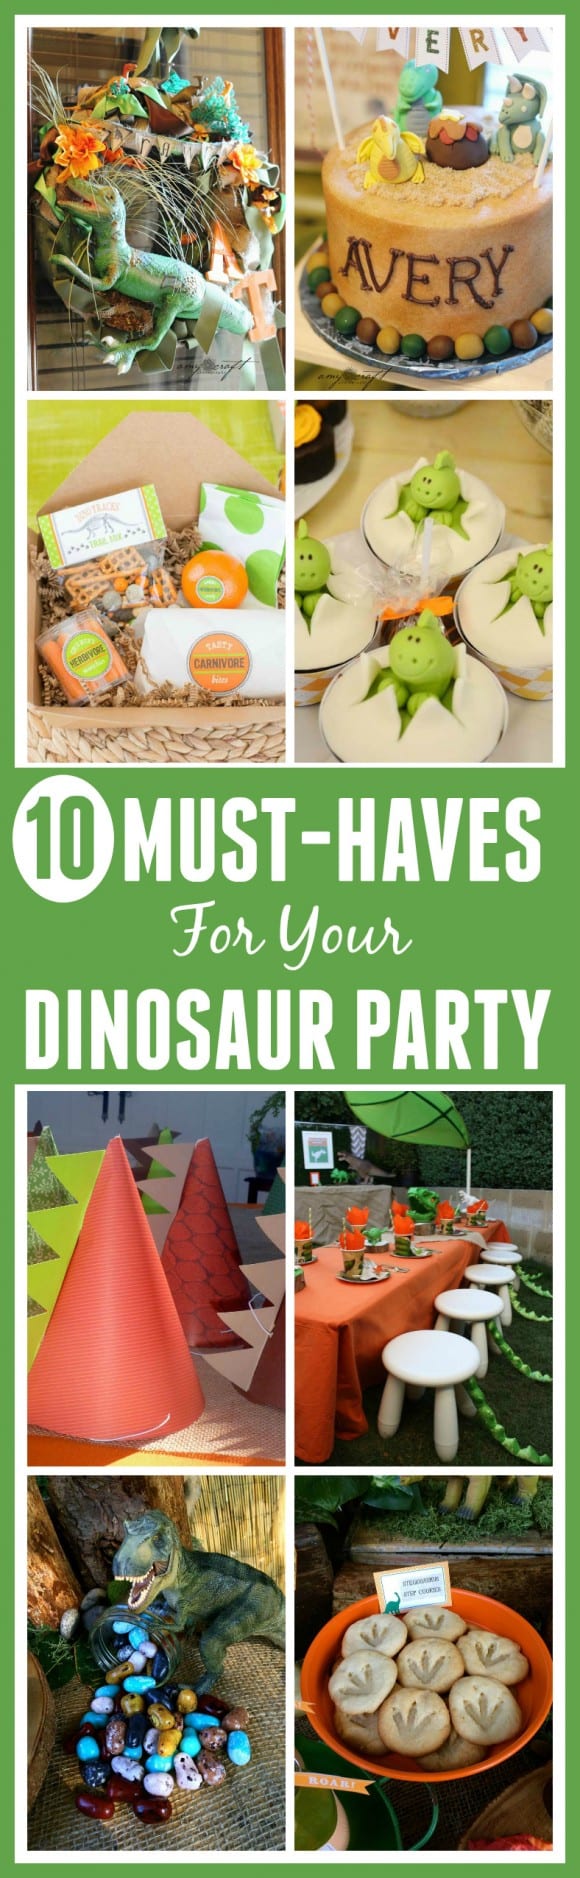 10 Must-Haves for your Dinosaur Party | CatchMyParty.com